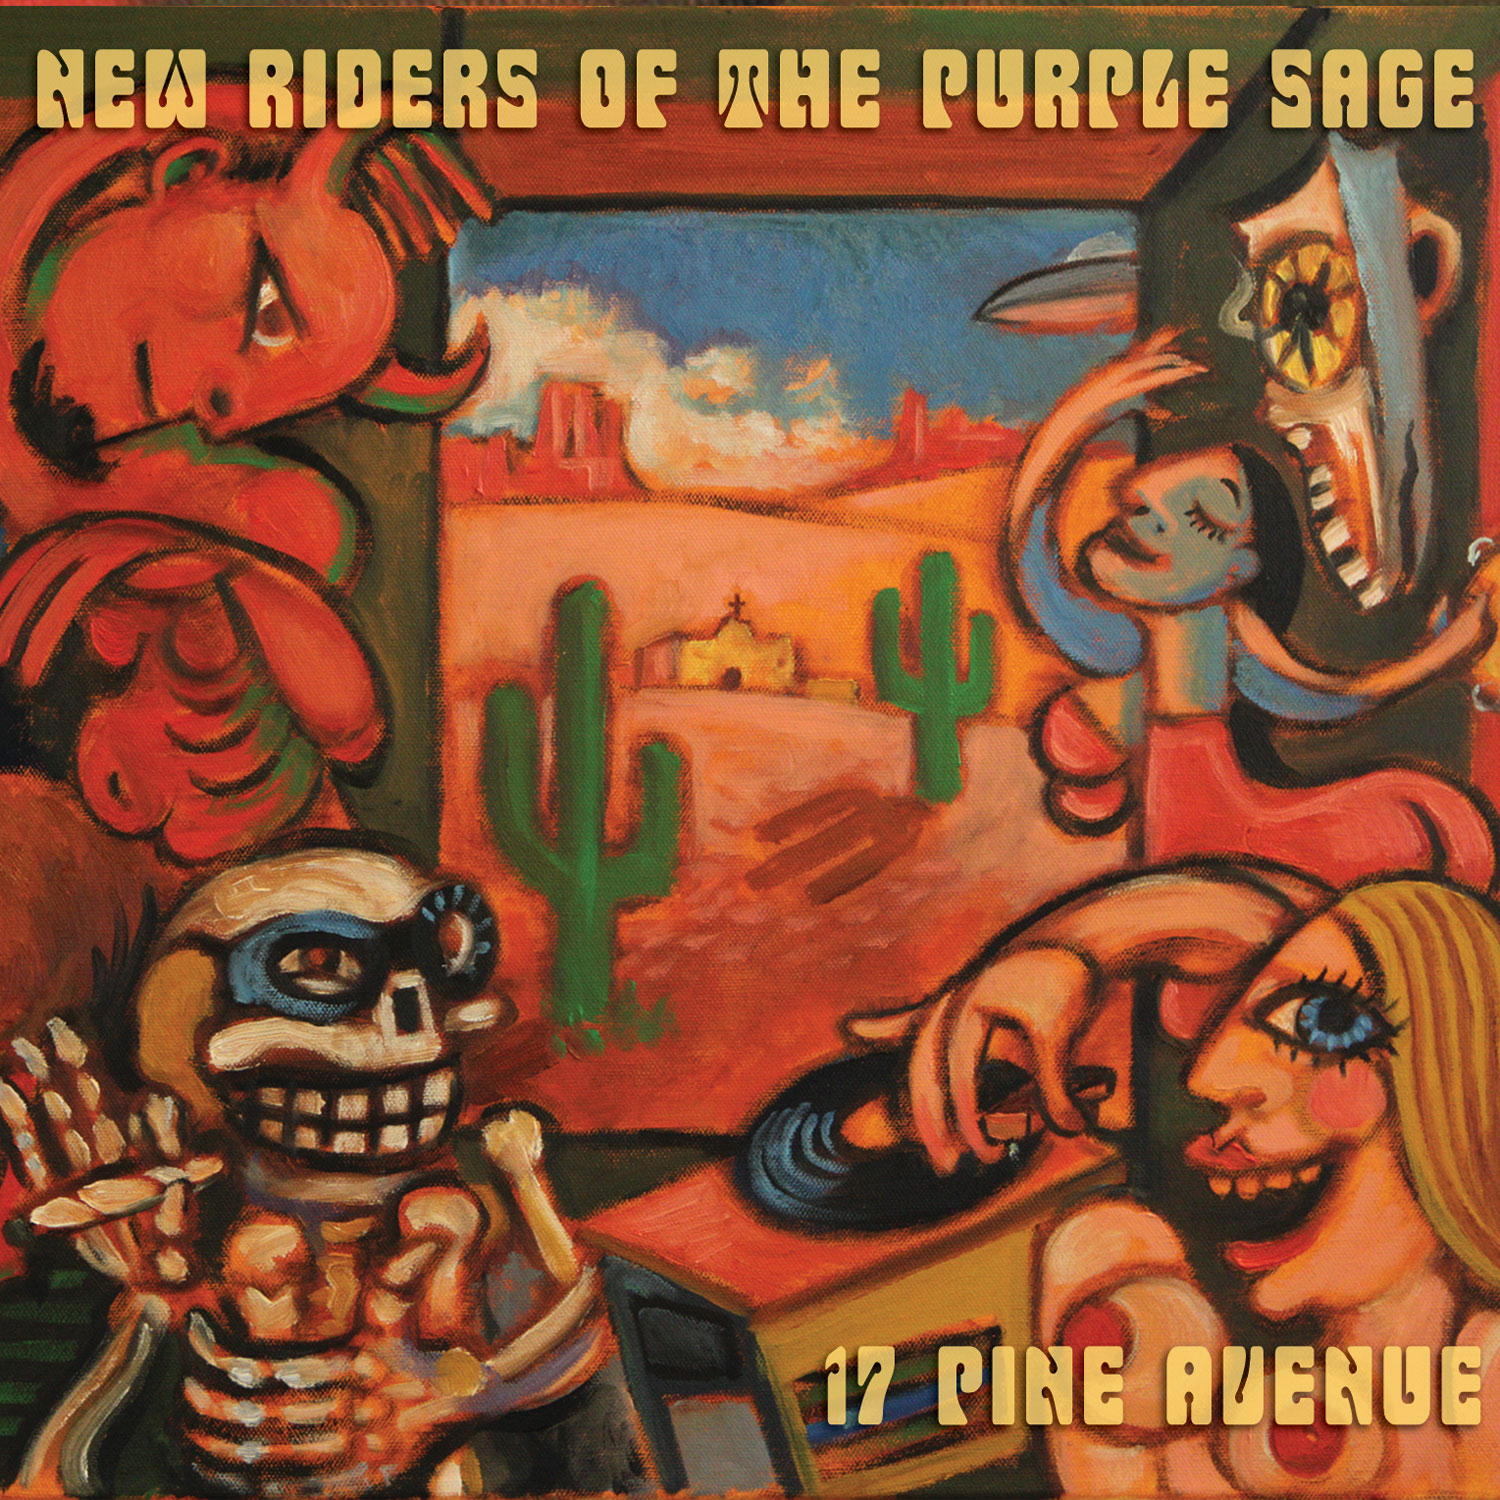 New Riders of the Purple Sage Album Cover - 17 Pine Ave.